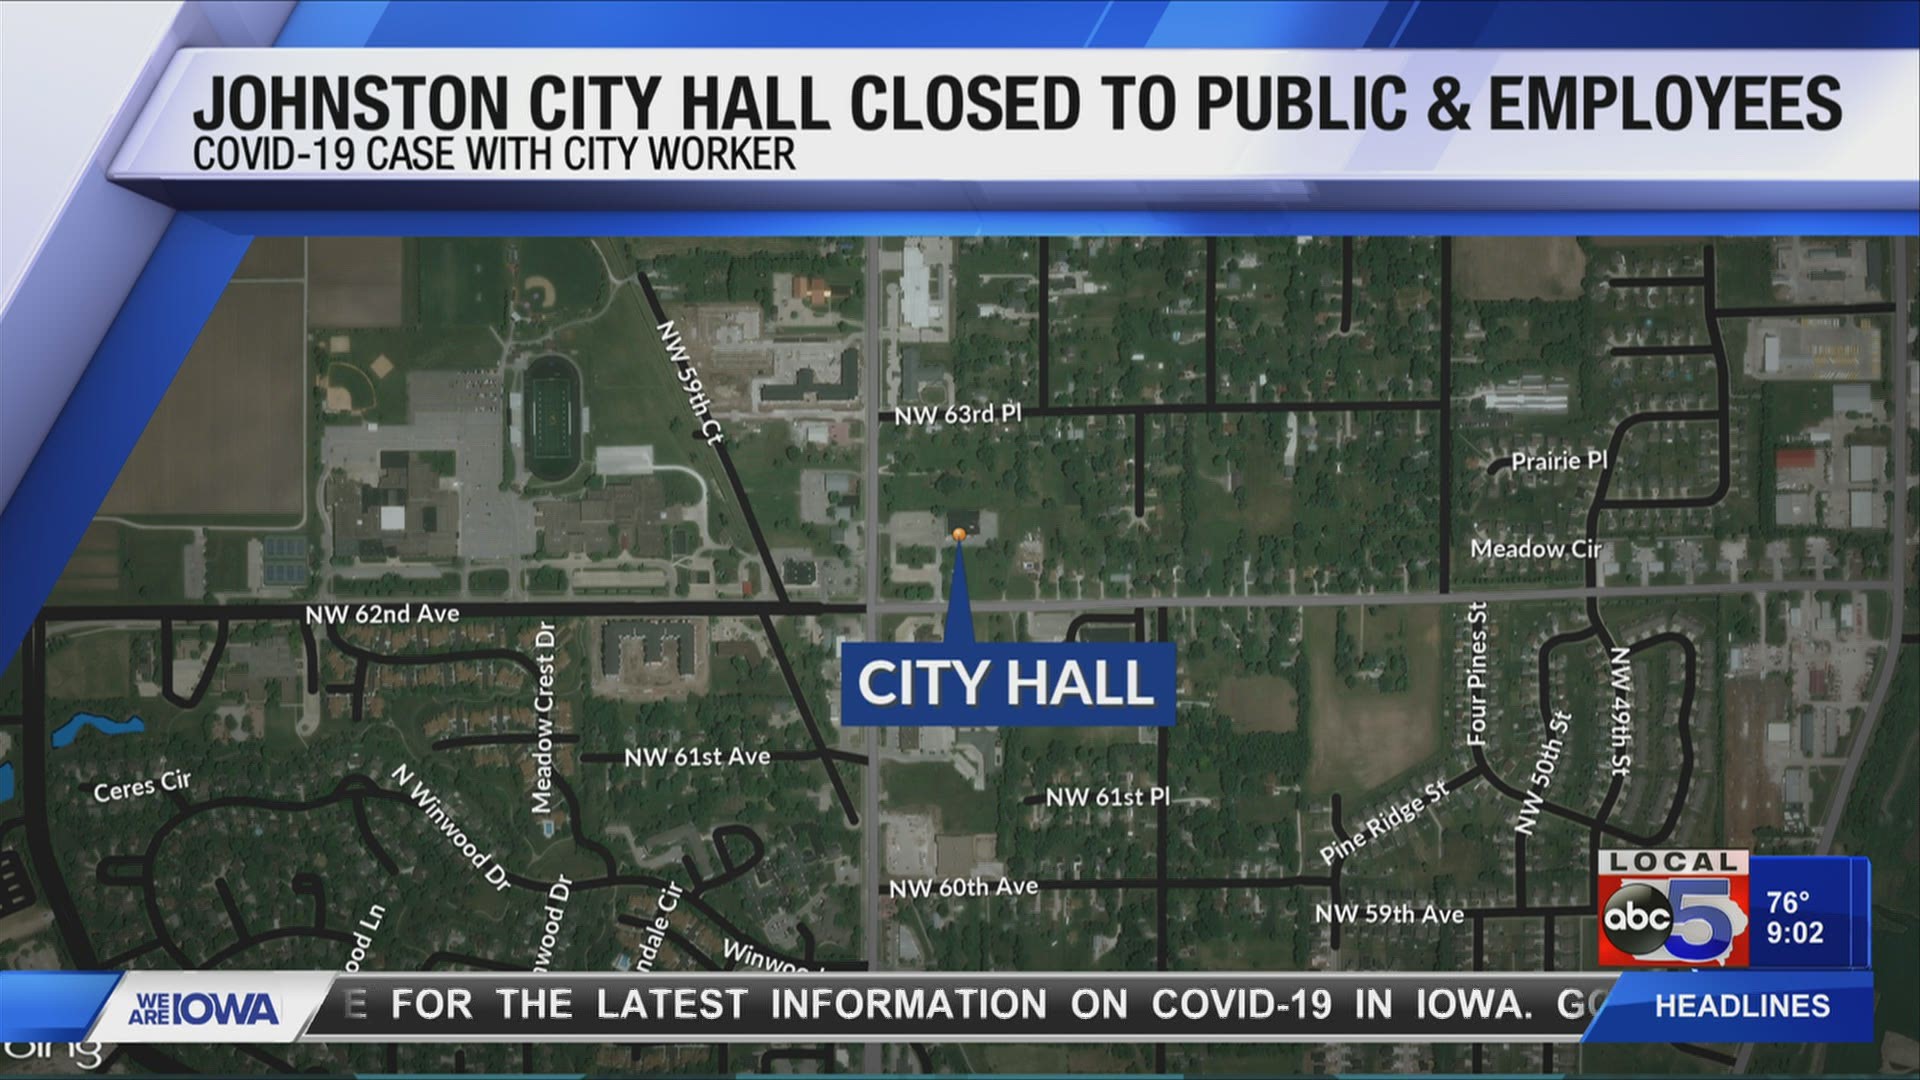 Leaders closed the Johnston City Hall Wednesday after they said an employee tested positive for COVID-19.